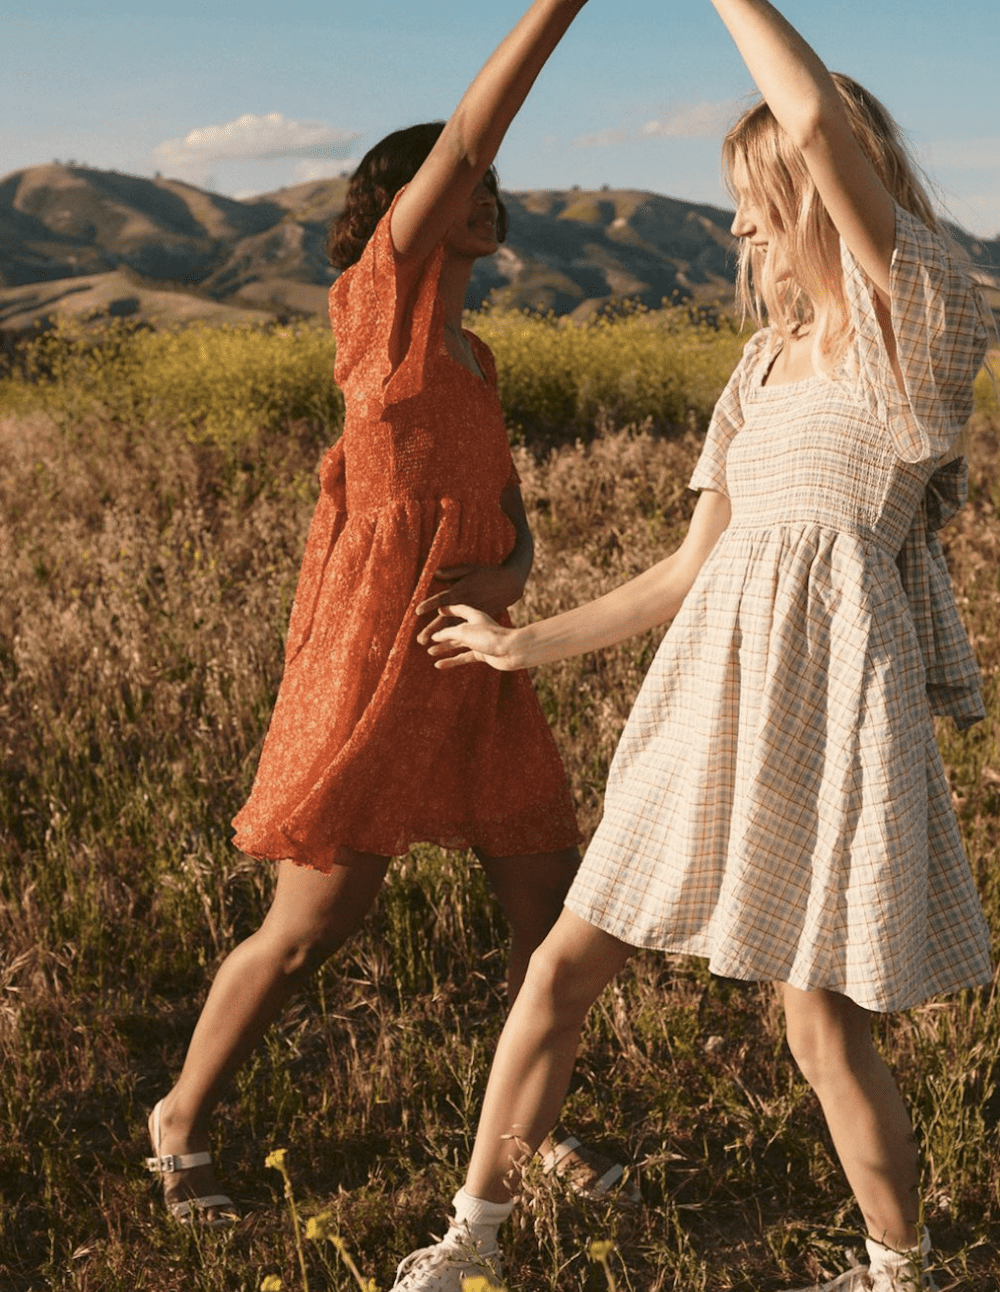 image of two young women dancing in a field wearing pretty summer dresses